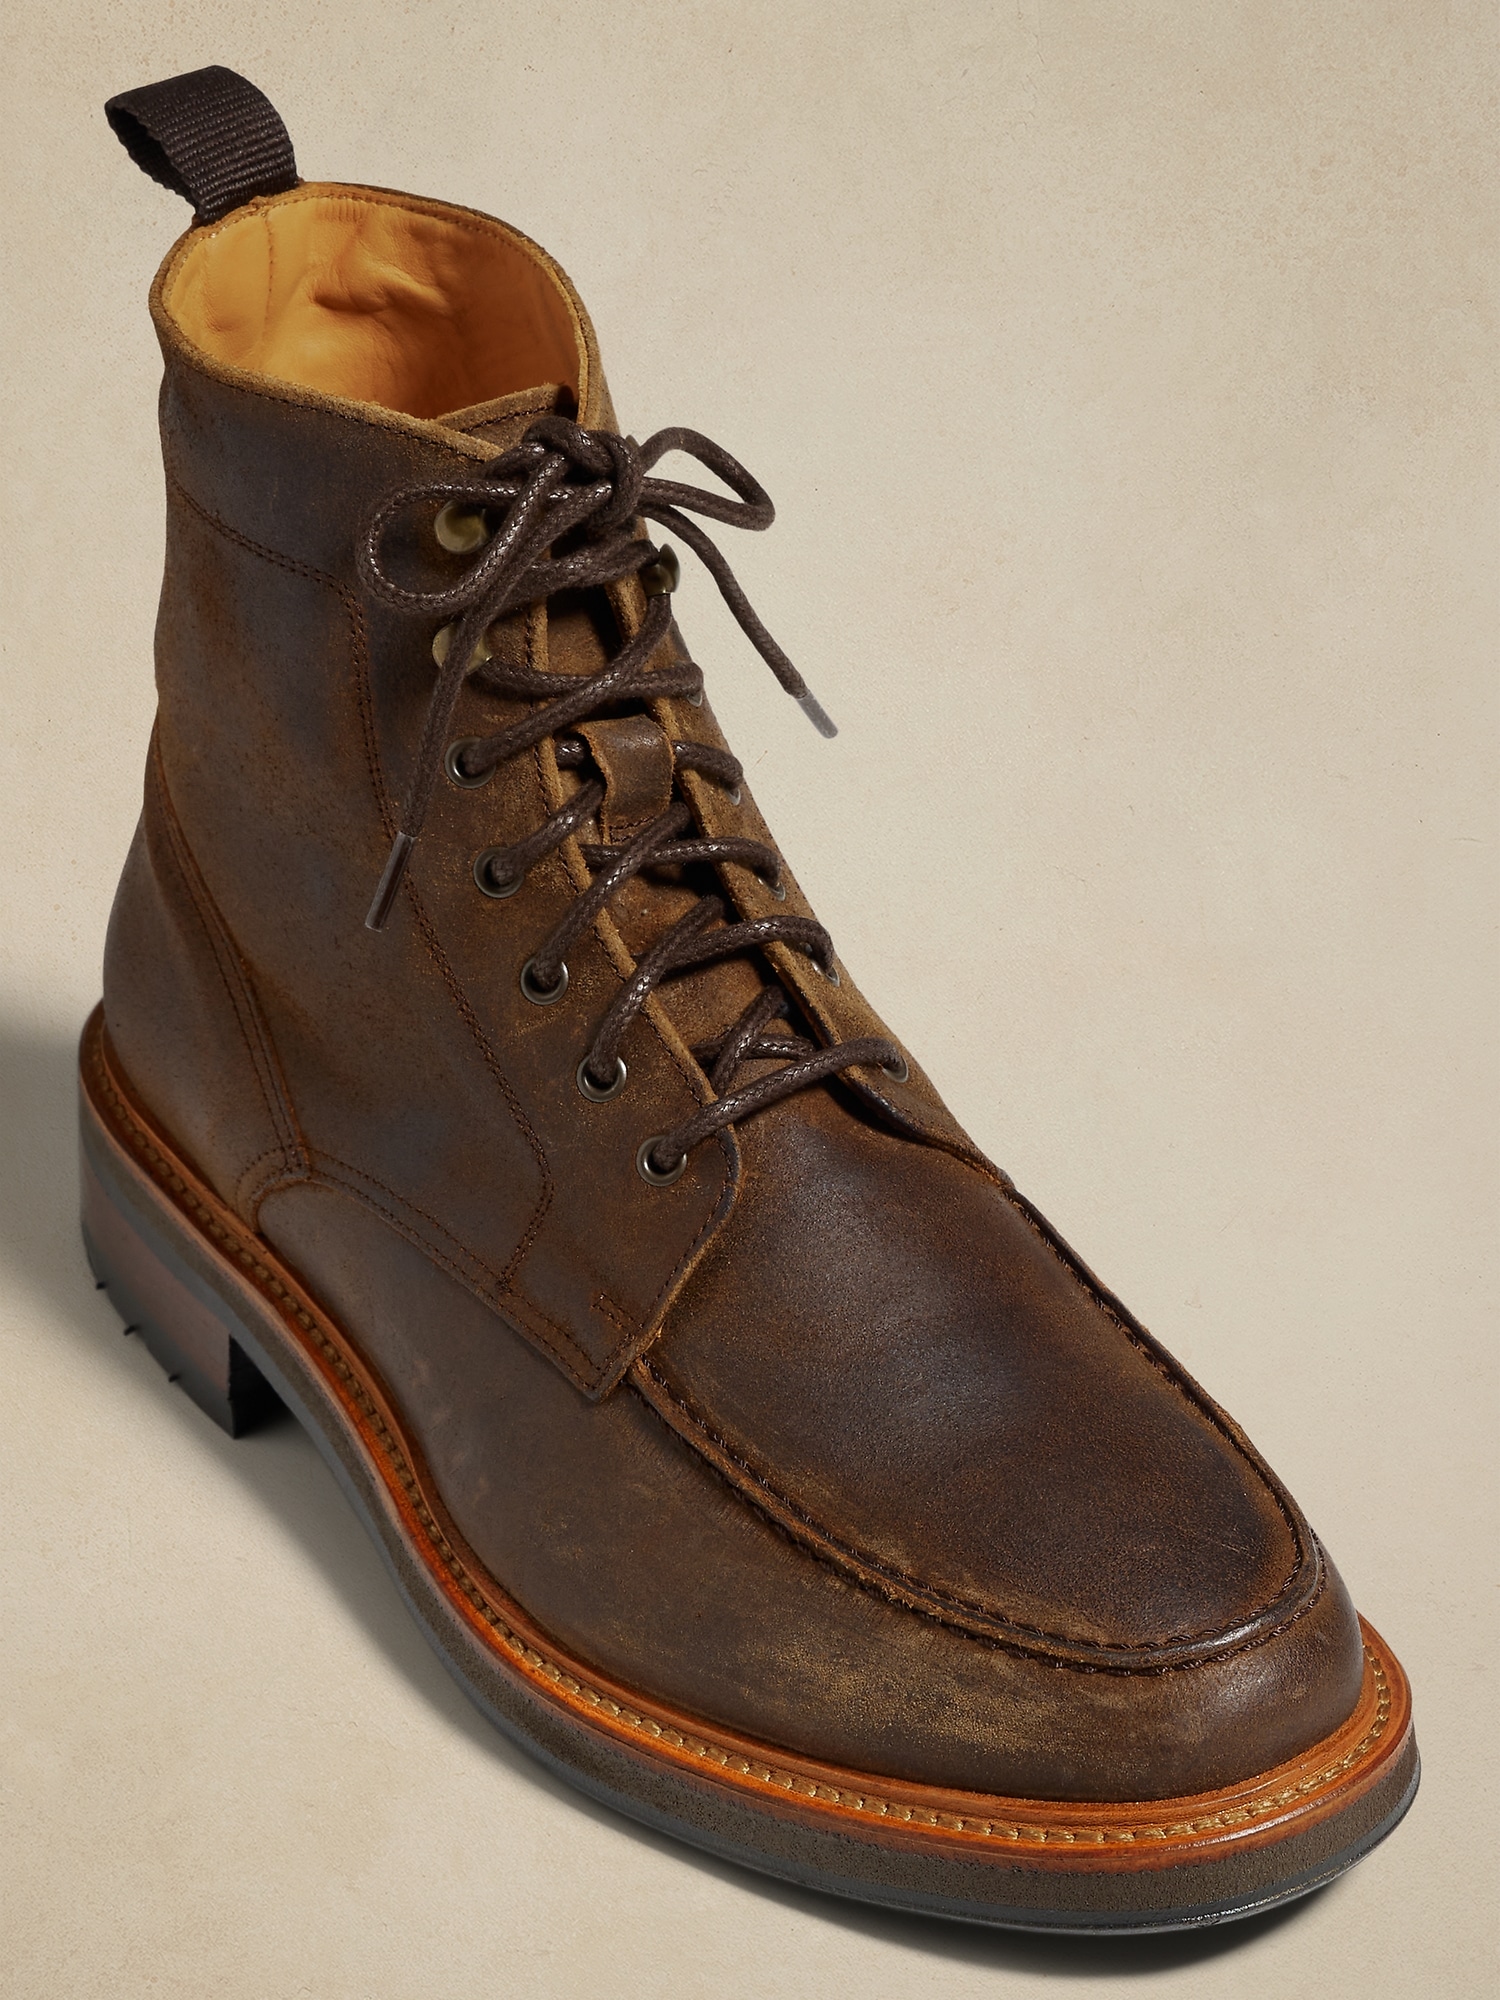 Nico Leather Lace-Up Boot | Banana Republic